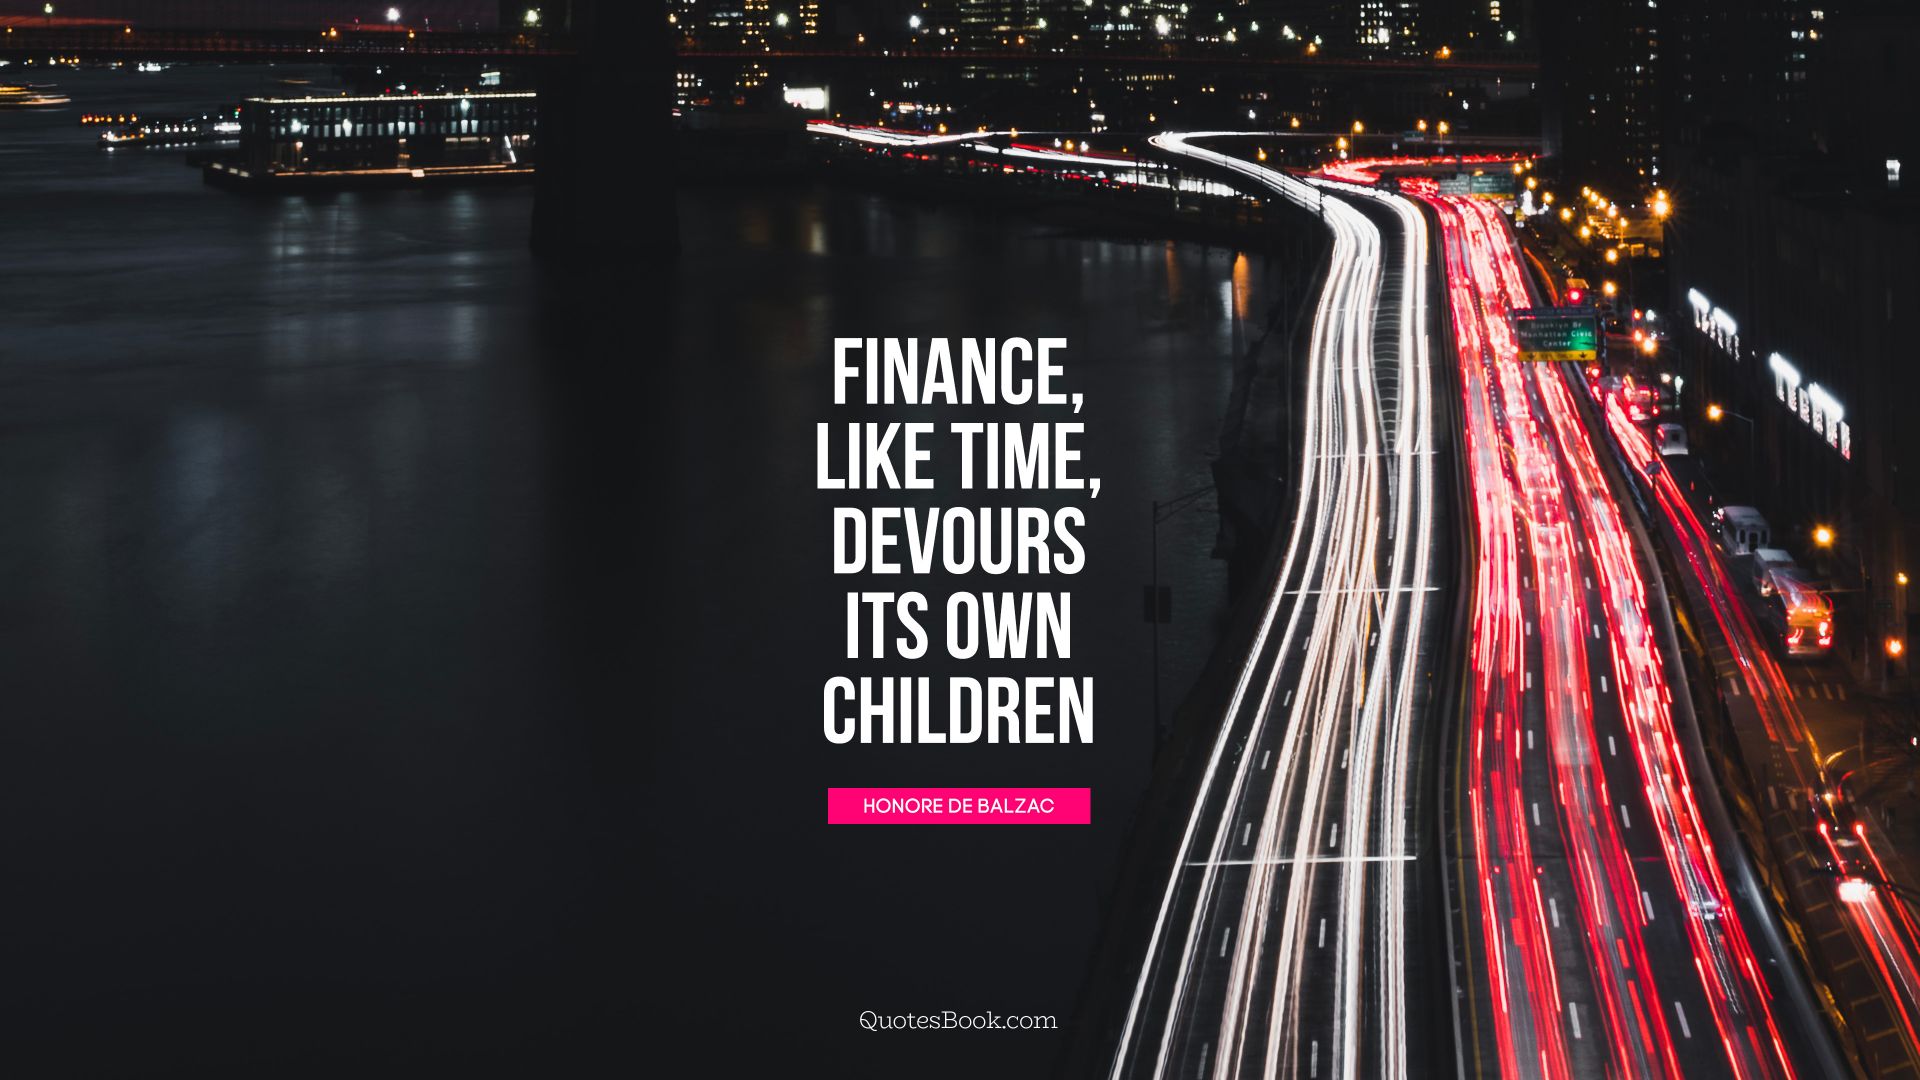 Finance, like time, devours its own 
children. - Quote by Honore de Balzac